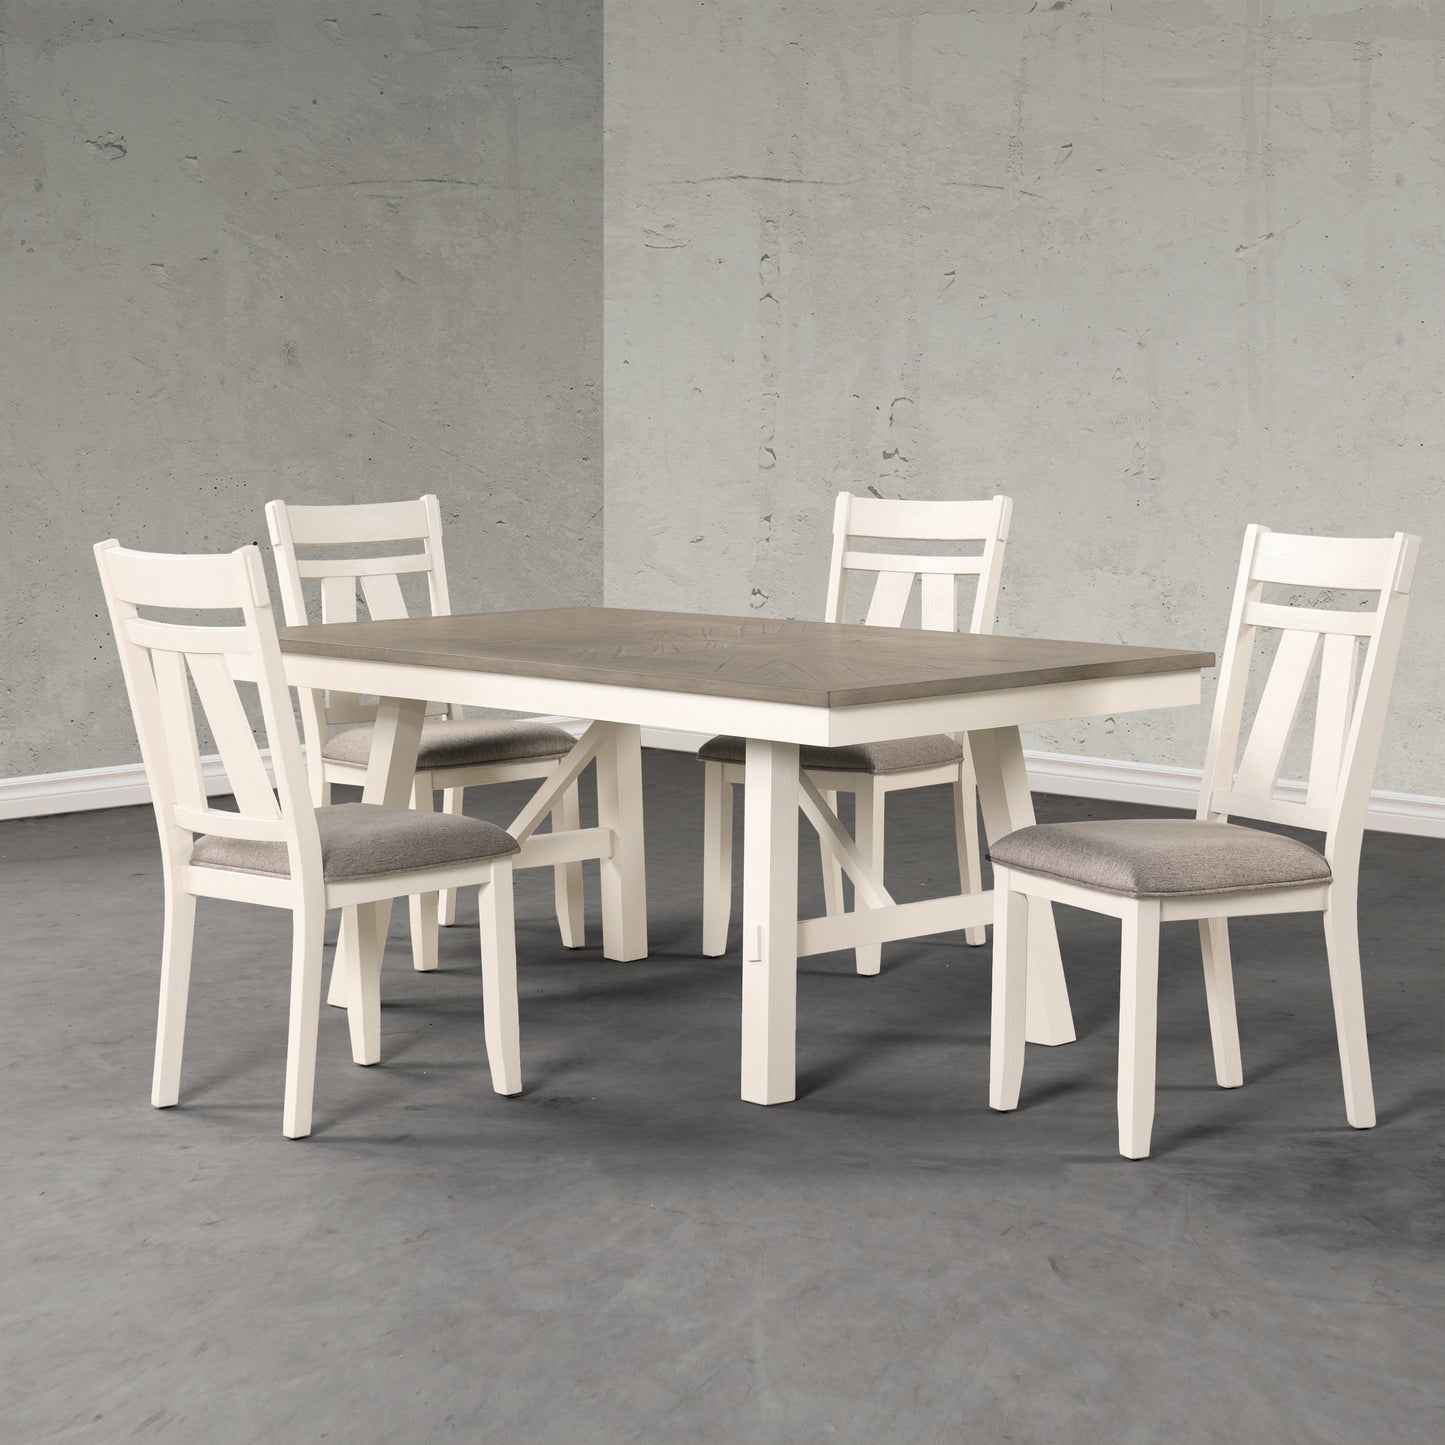 Roundhill Furniture Fasena 5-Piece Dining Set, Trestle Dining Table with 4 Chairs in Rustic Gray and Off White Finish